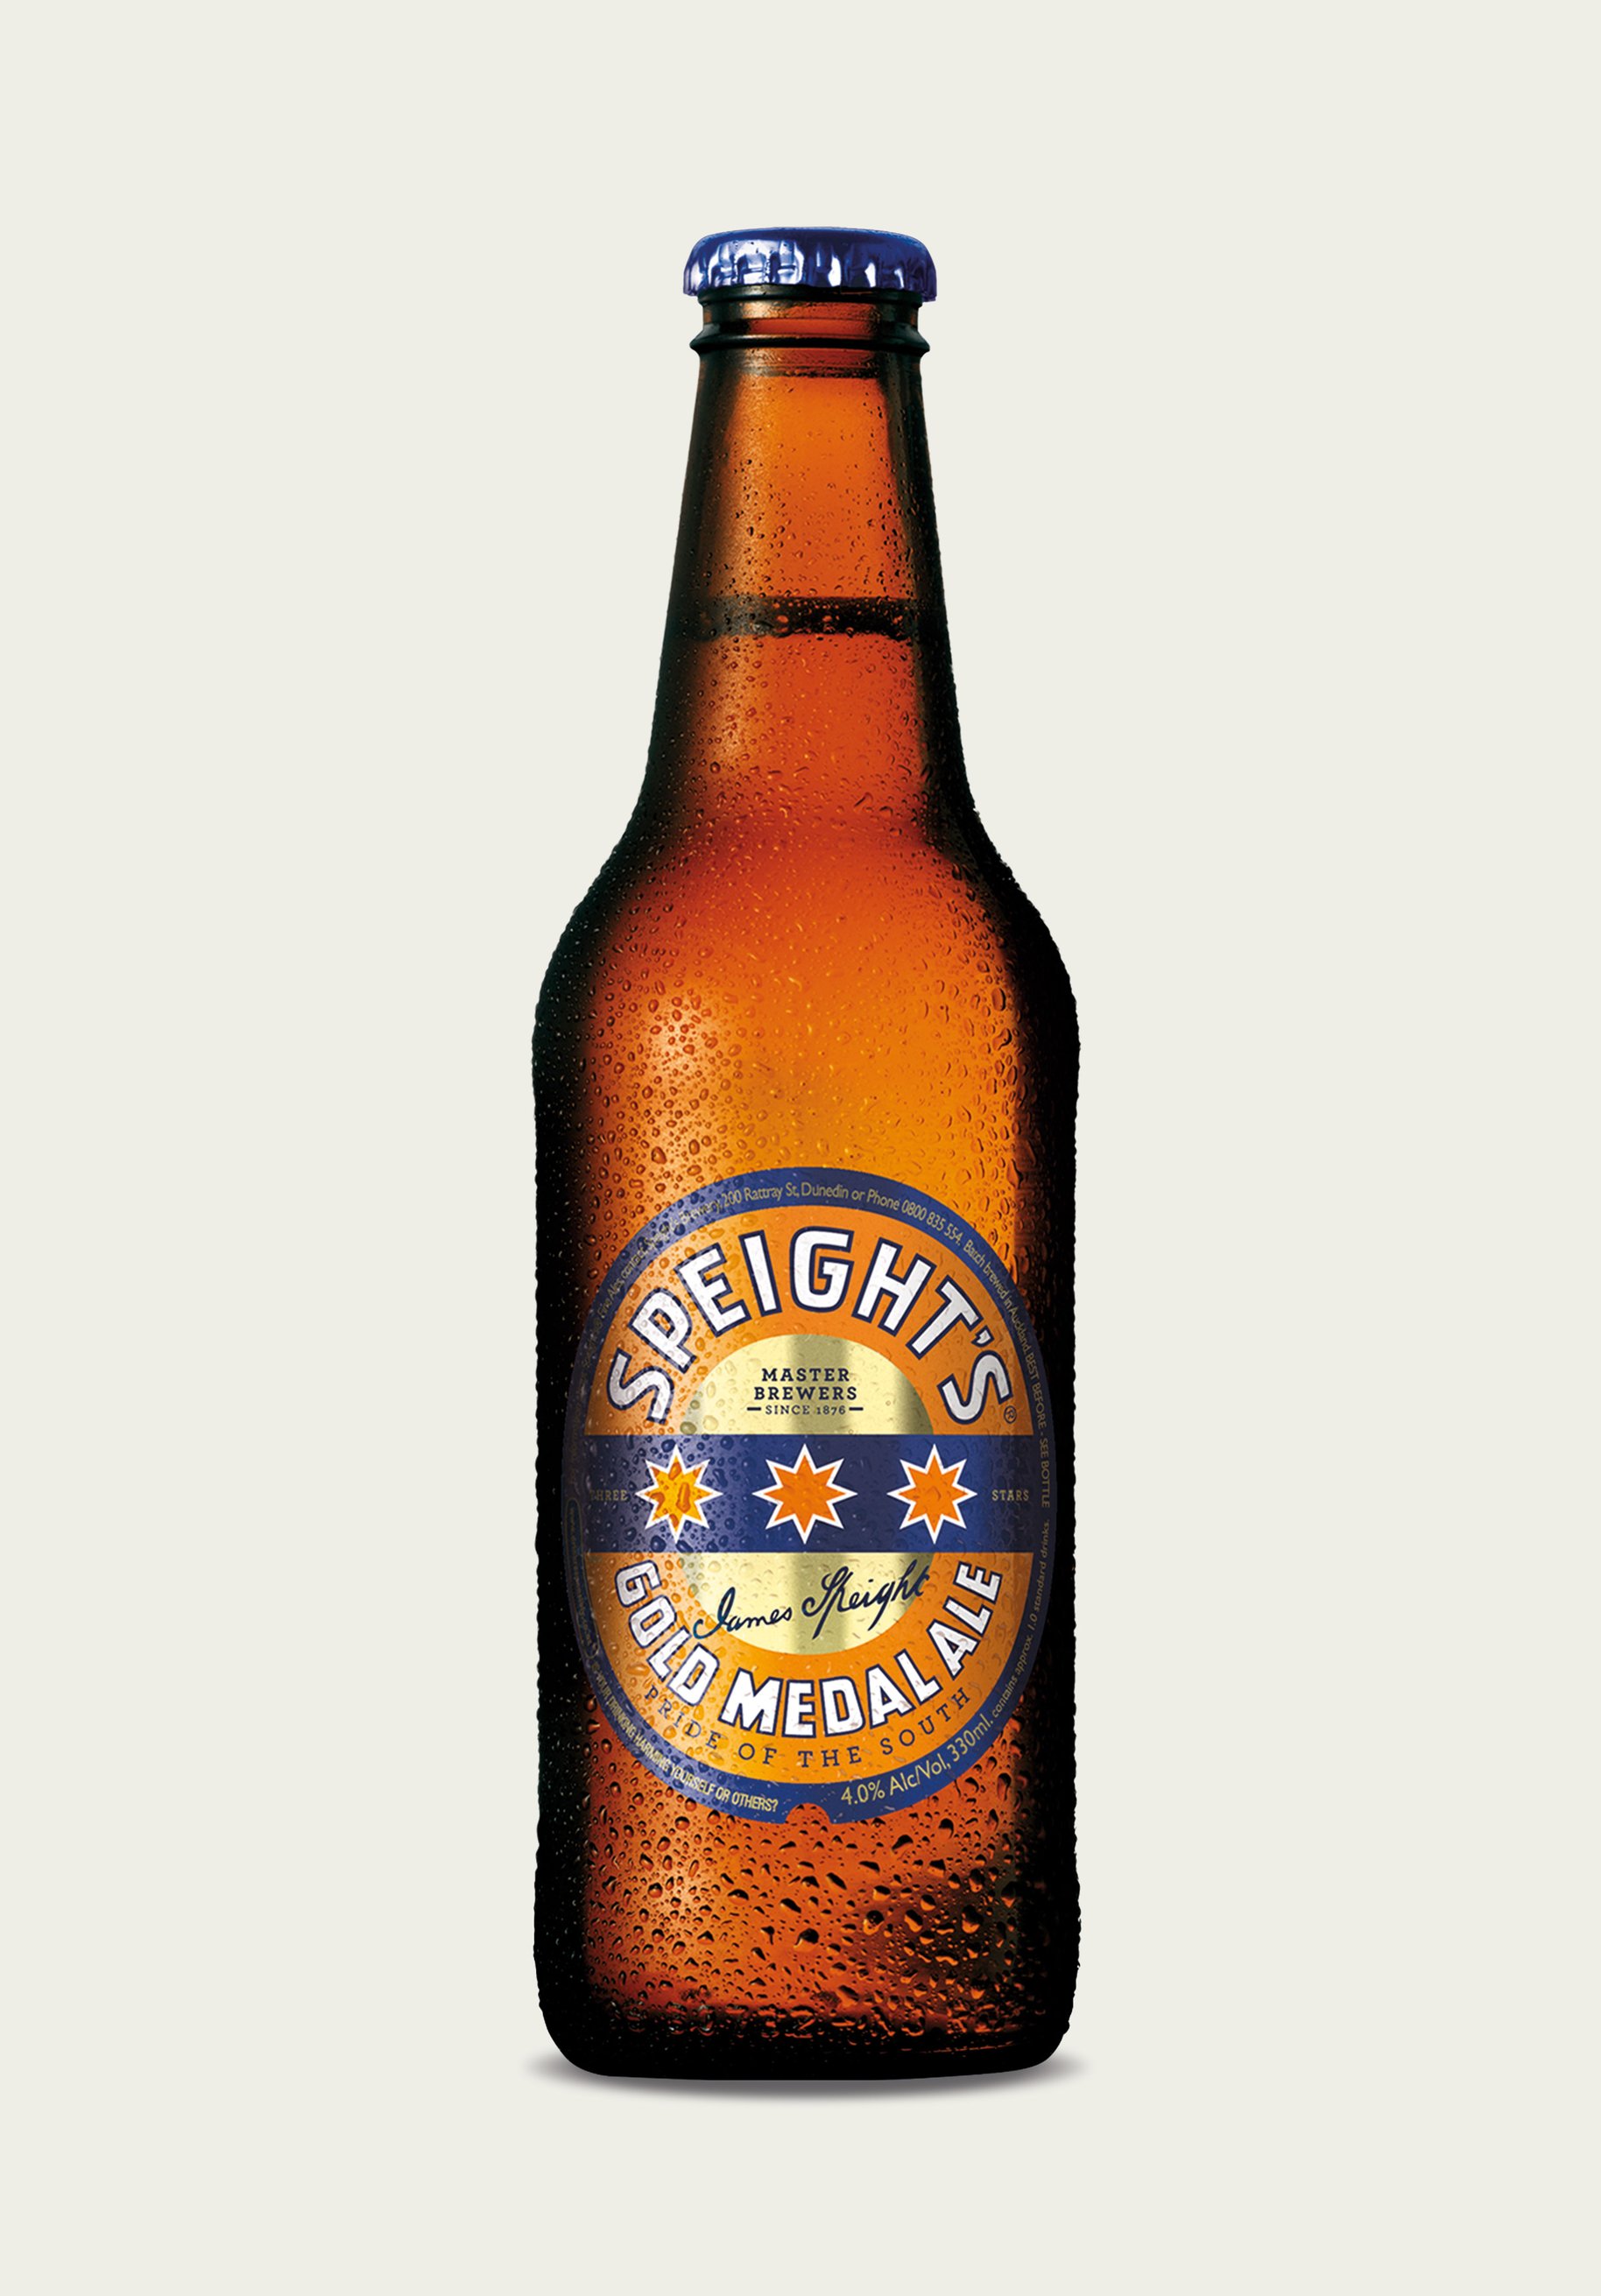 Speight's gold metal ale packaging